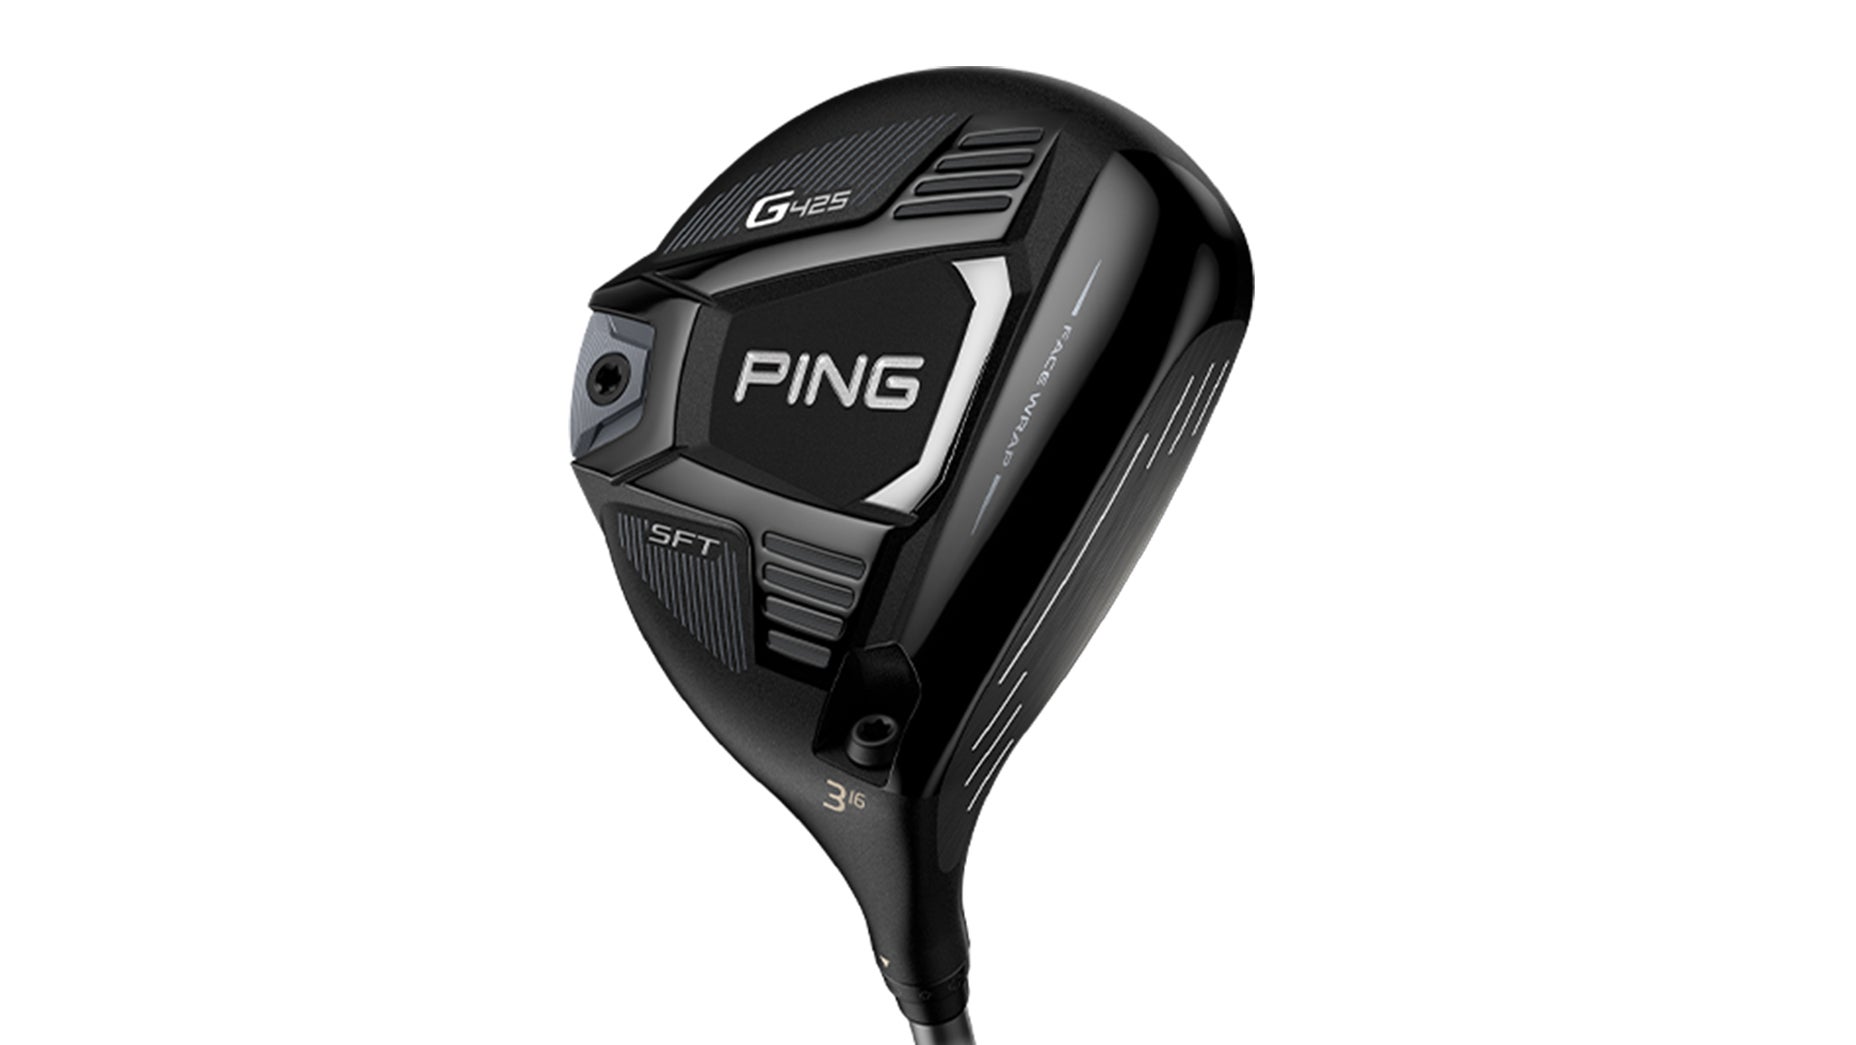 Ping G425 fairway woods: ClubTest 2021 review